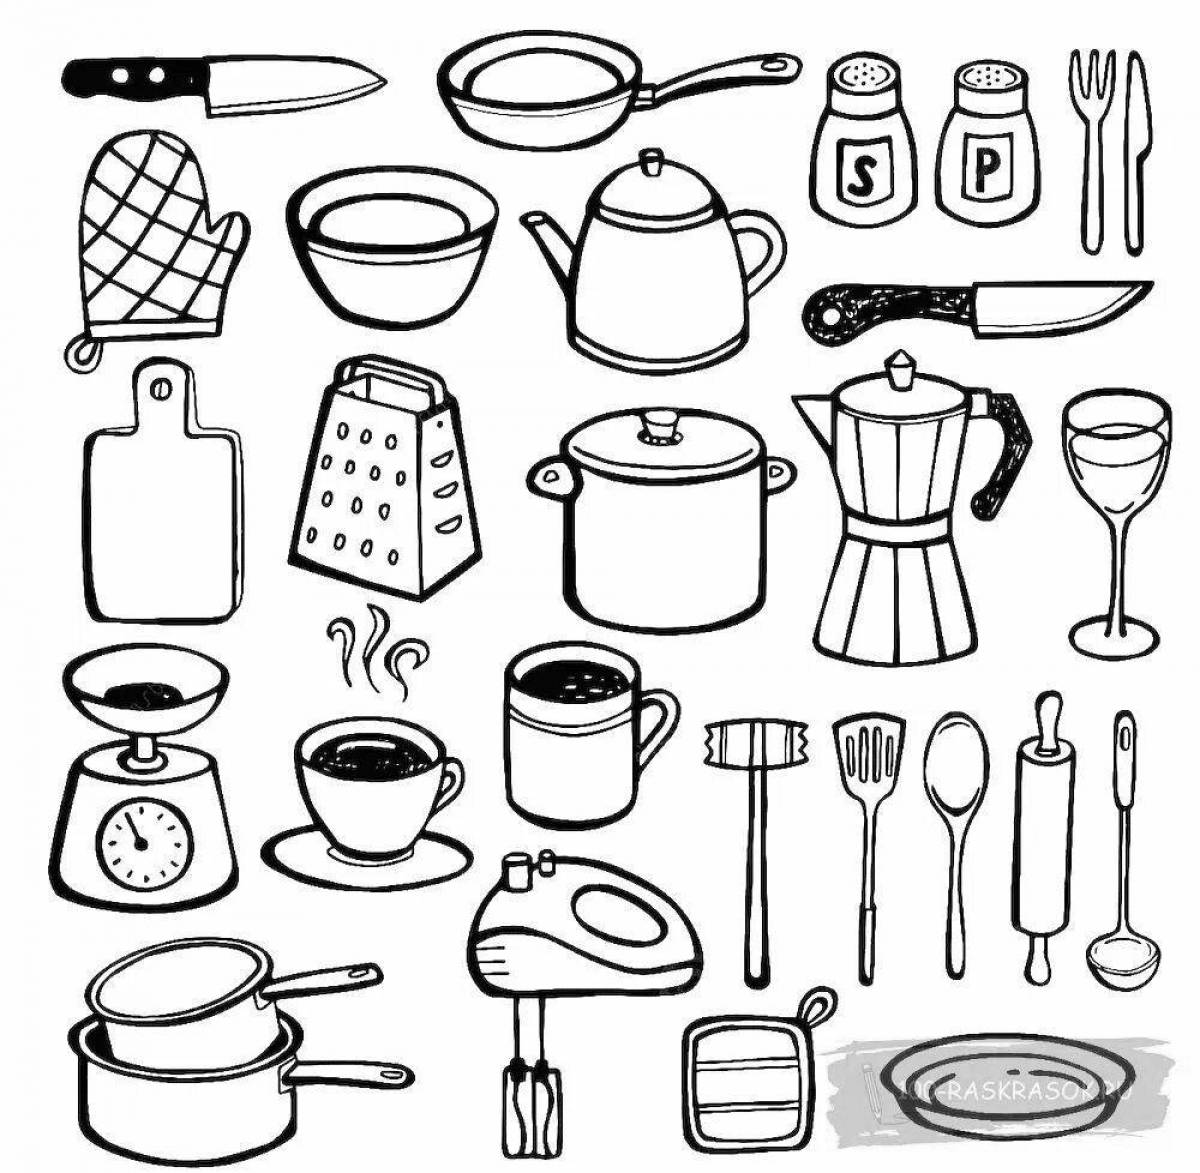 Great cook's tools coloring book